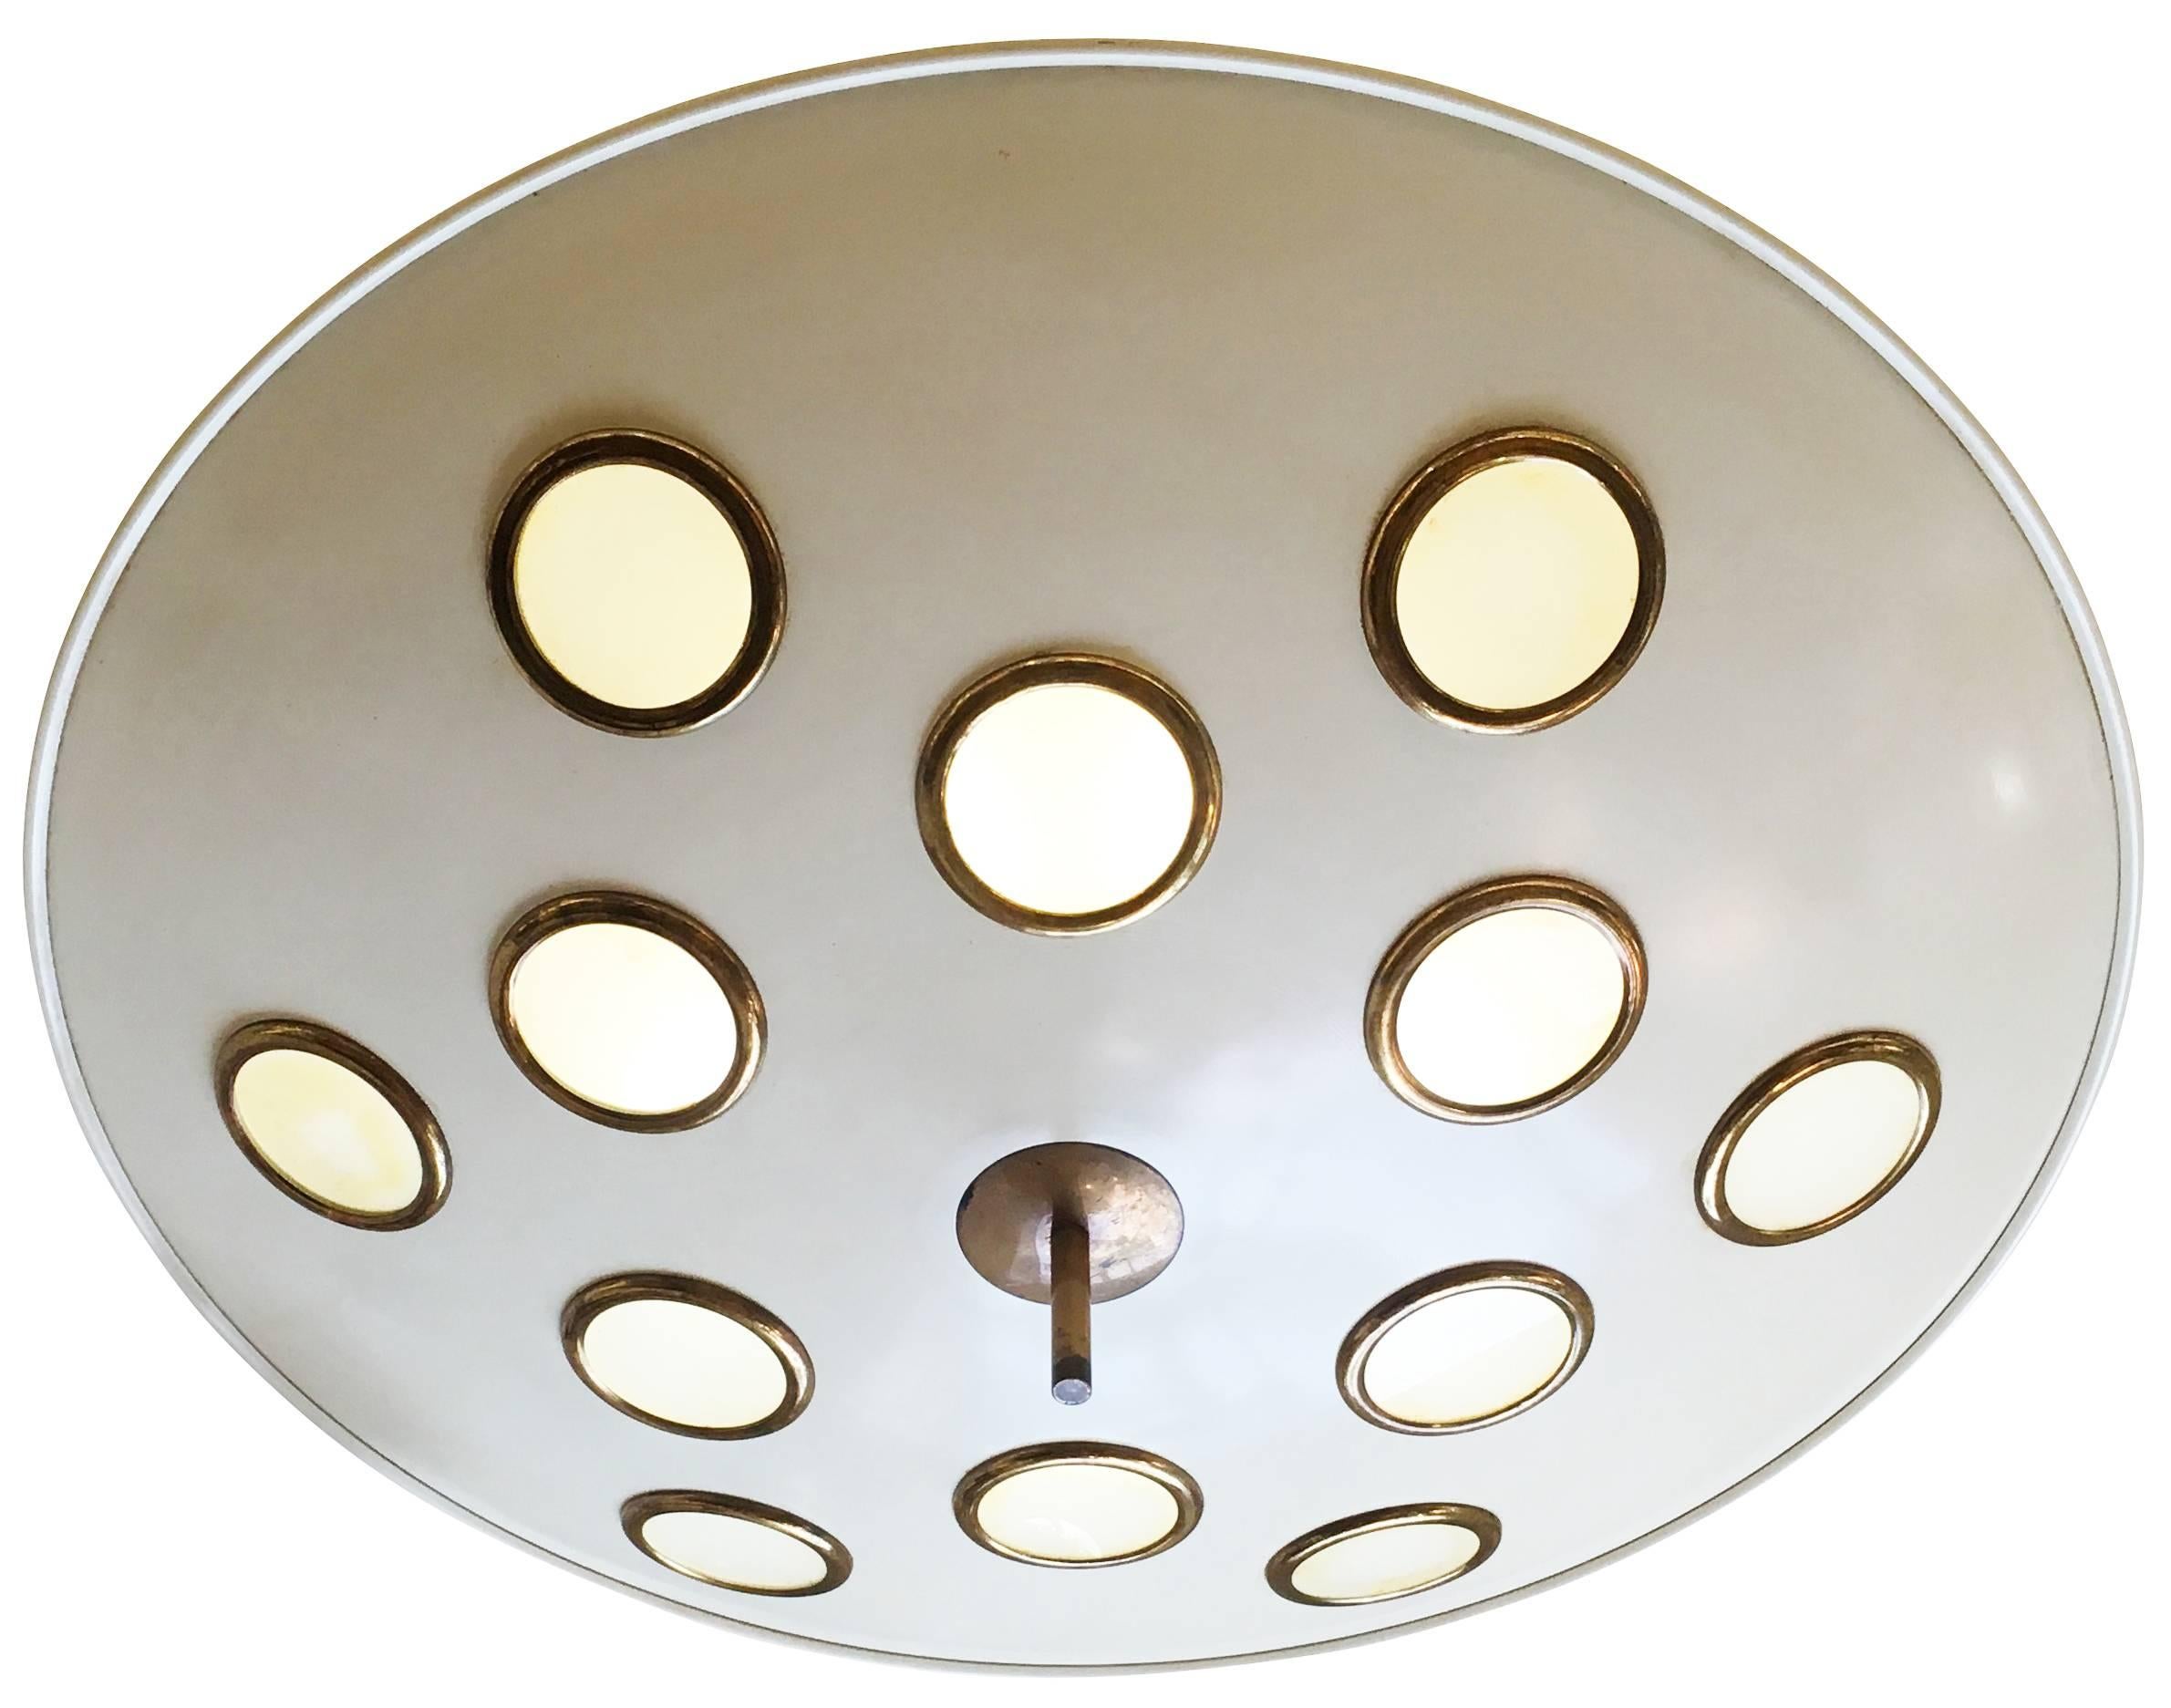 Italian Saucer Flush Mount Chandelier Attributed to Arredoluce, Italy, 1950s